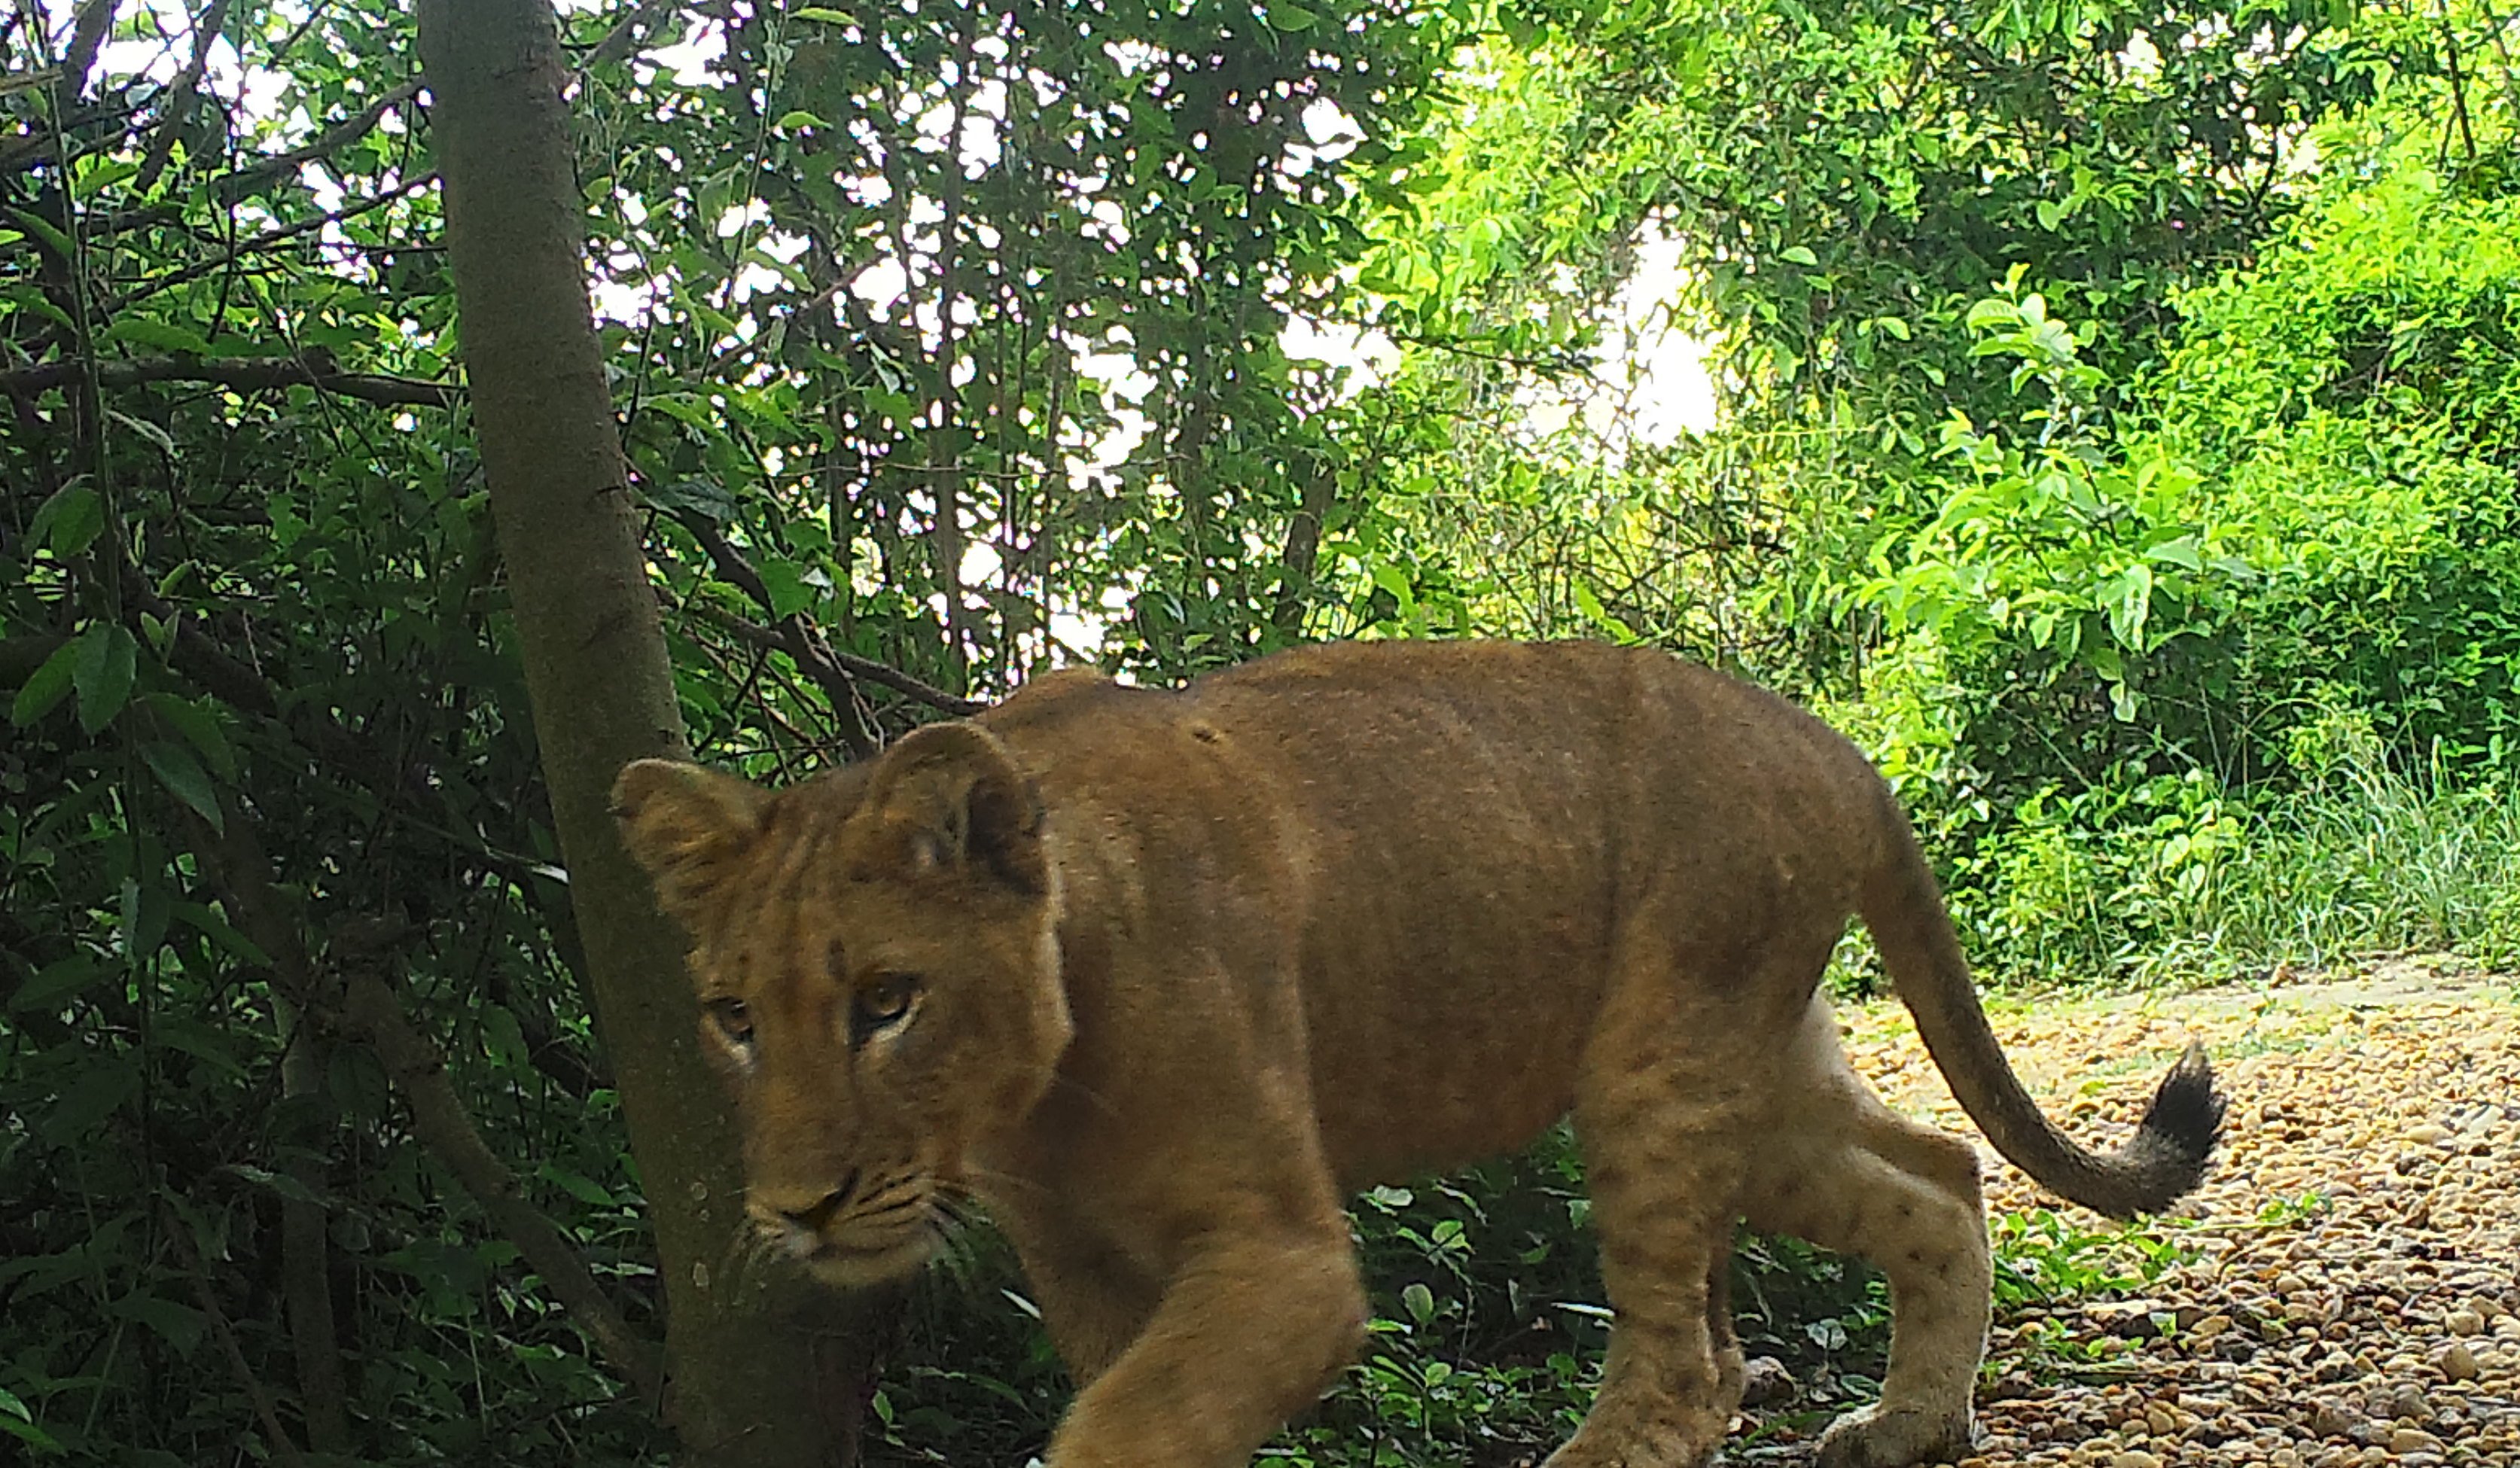 congolese spotted lion